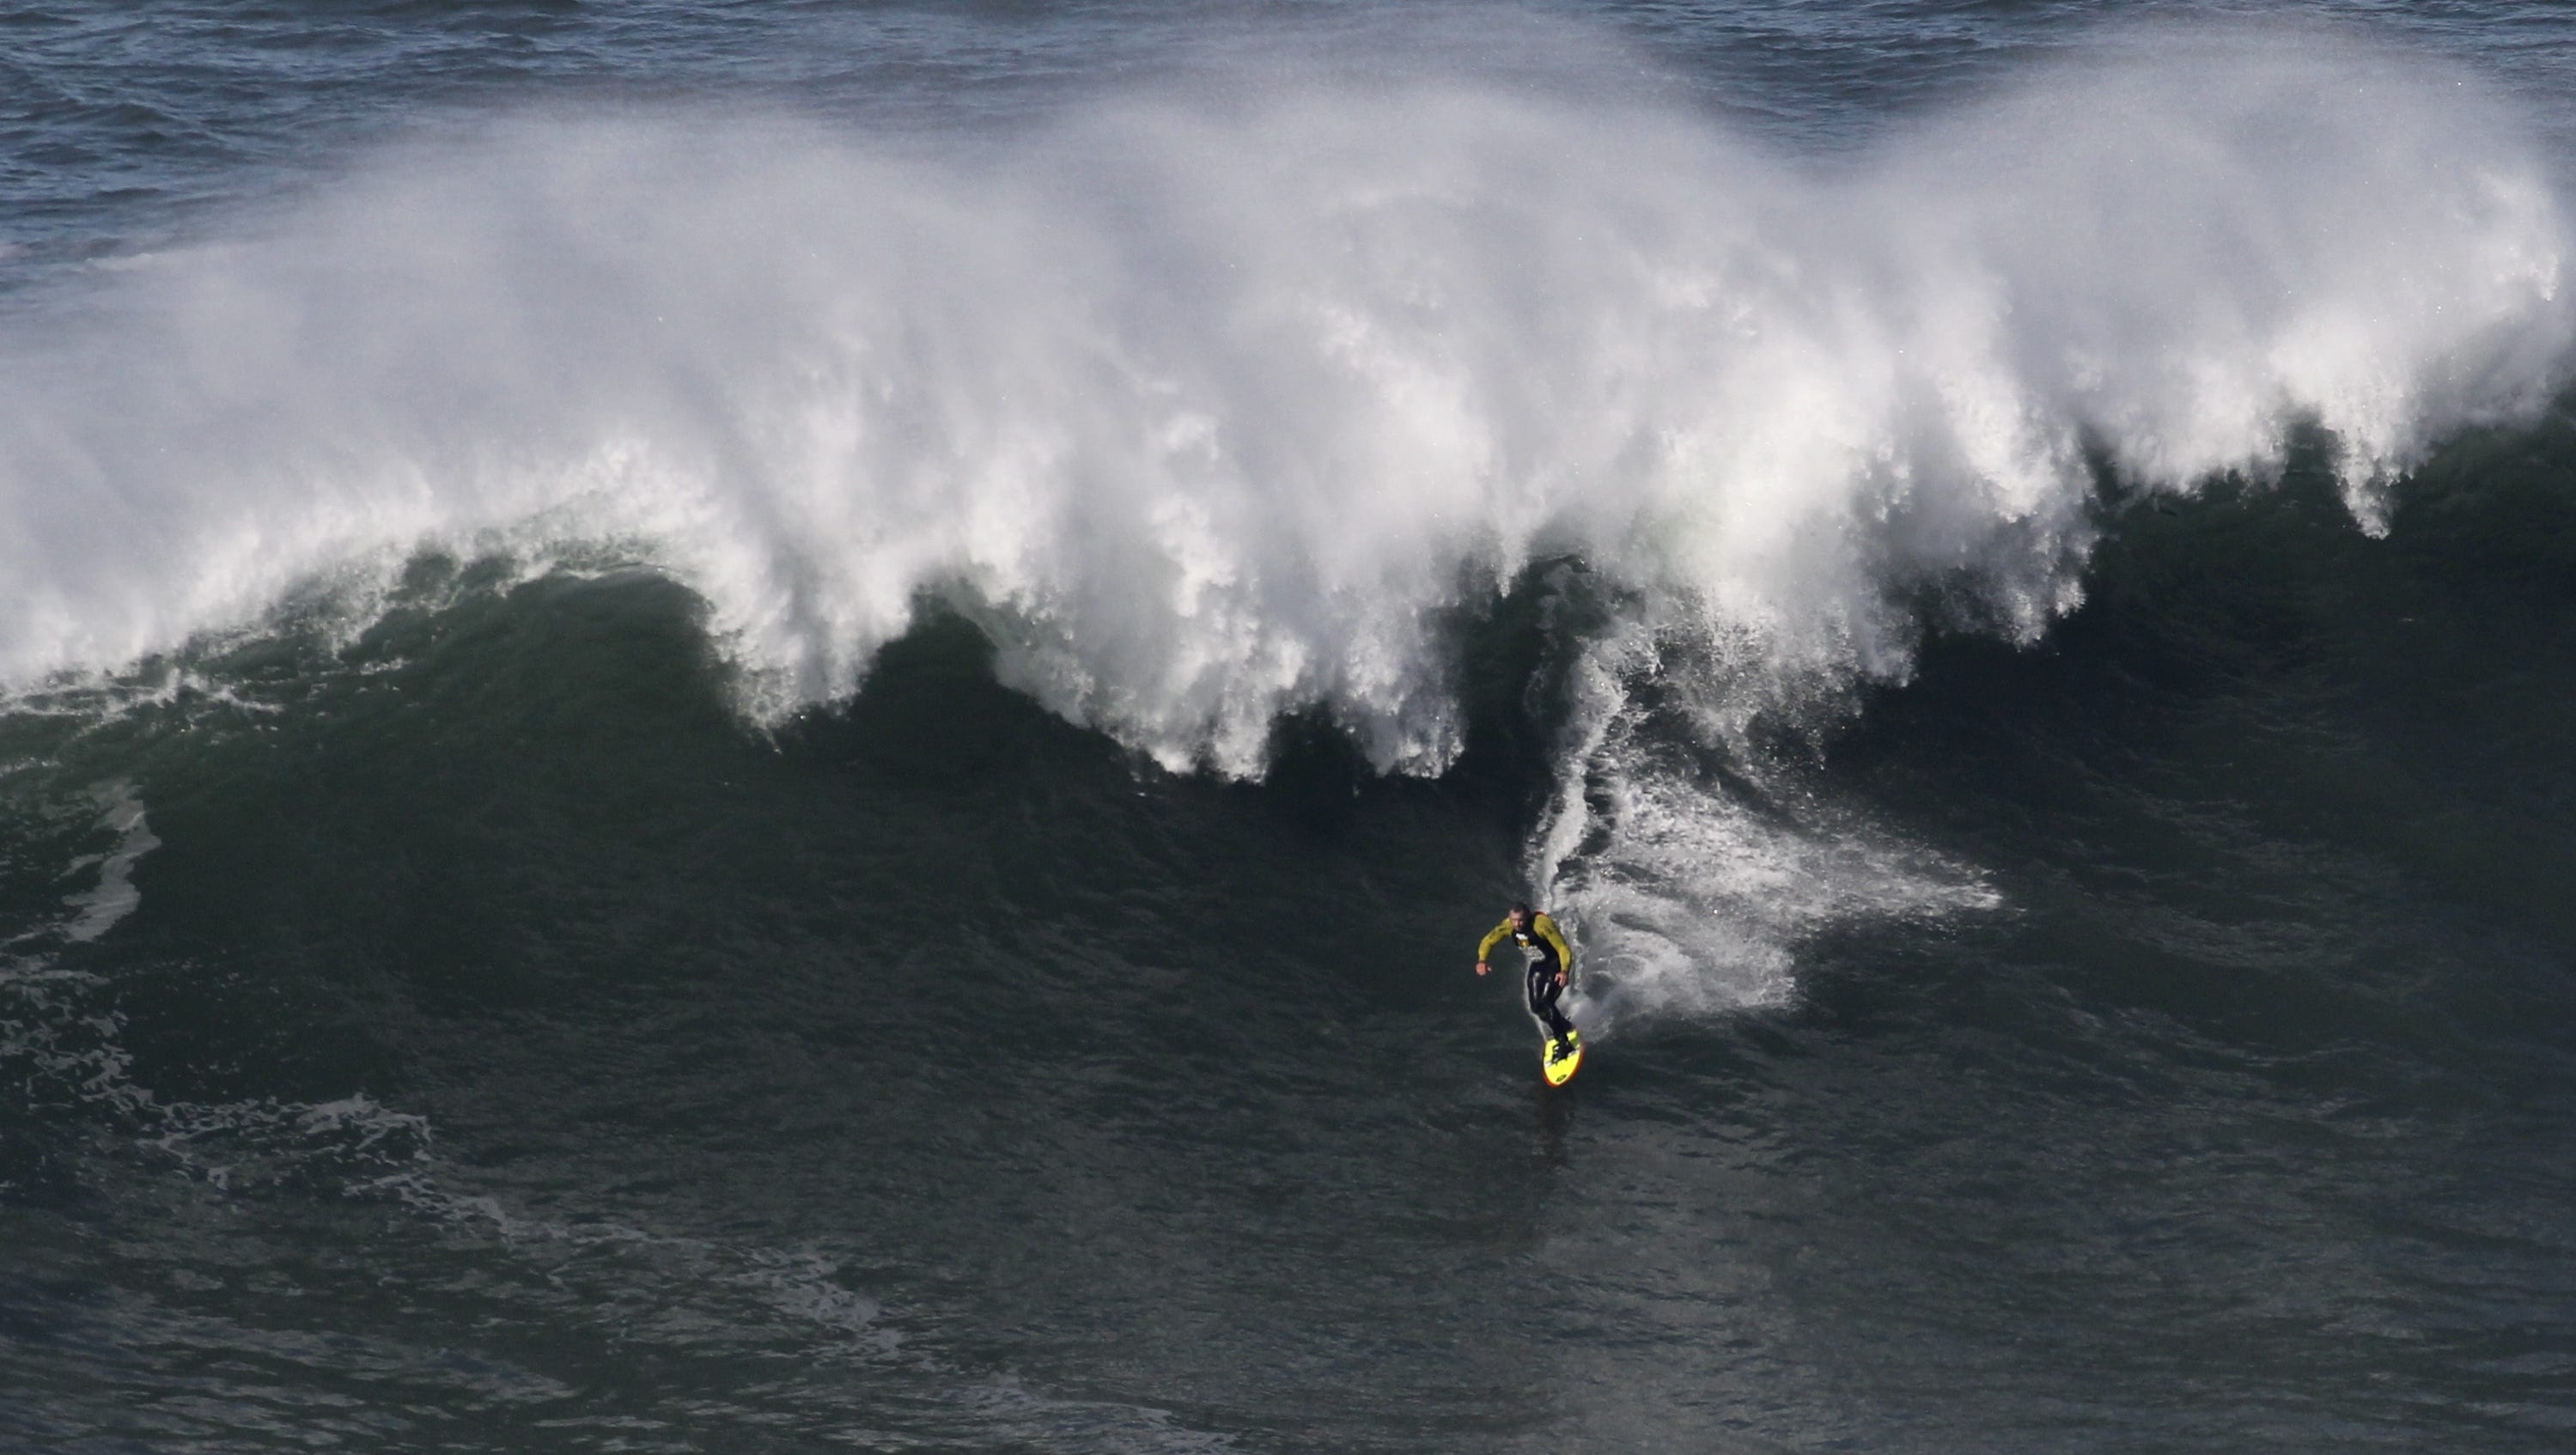 manipulate In most cases Juggling Did U.S. surfer break own record with 100-foot wave?